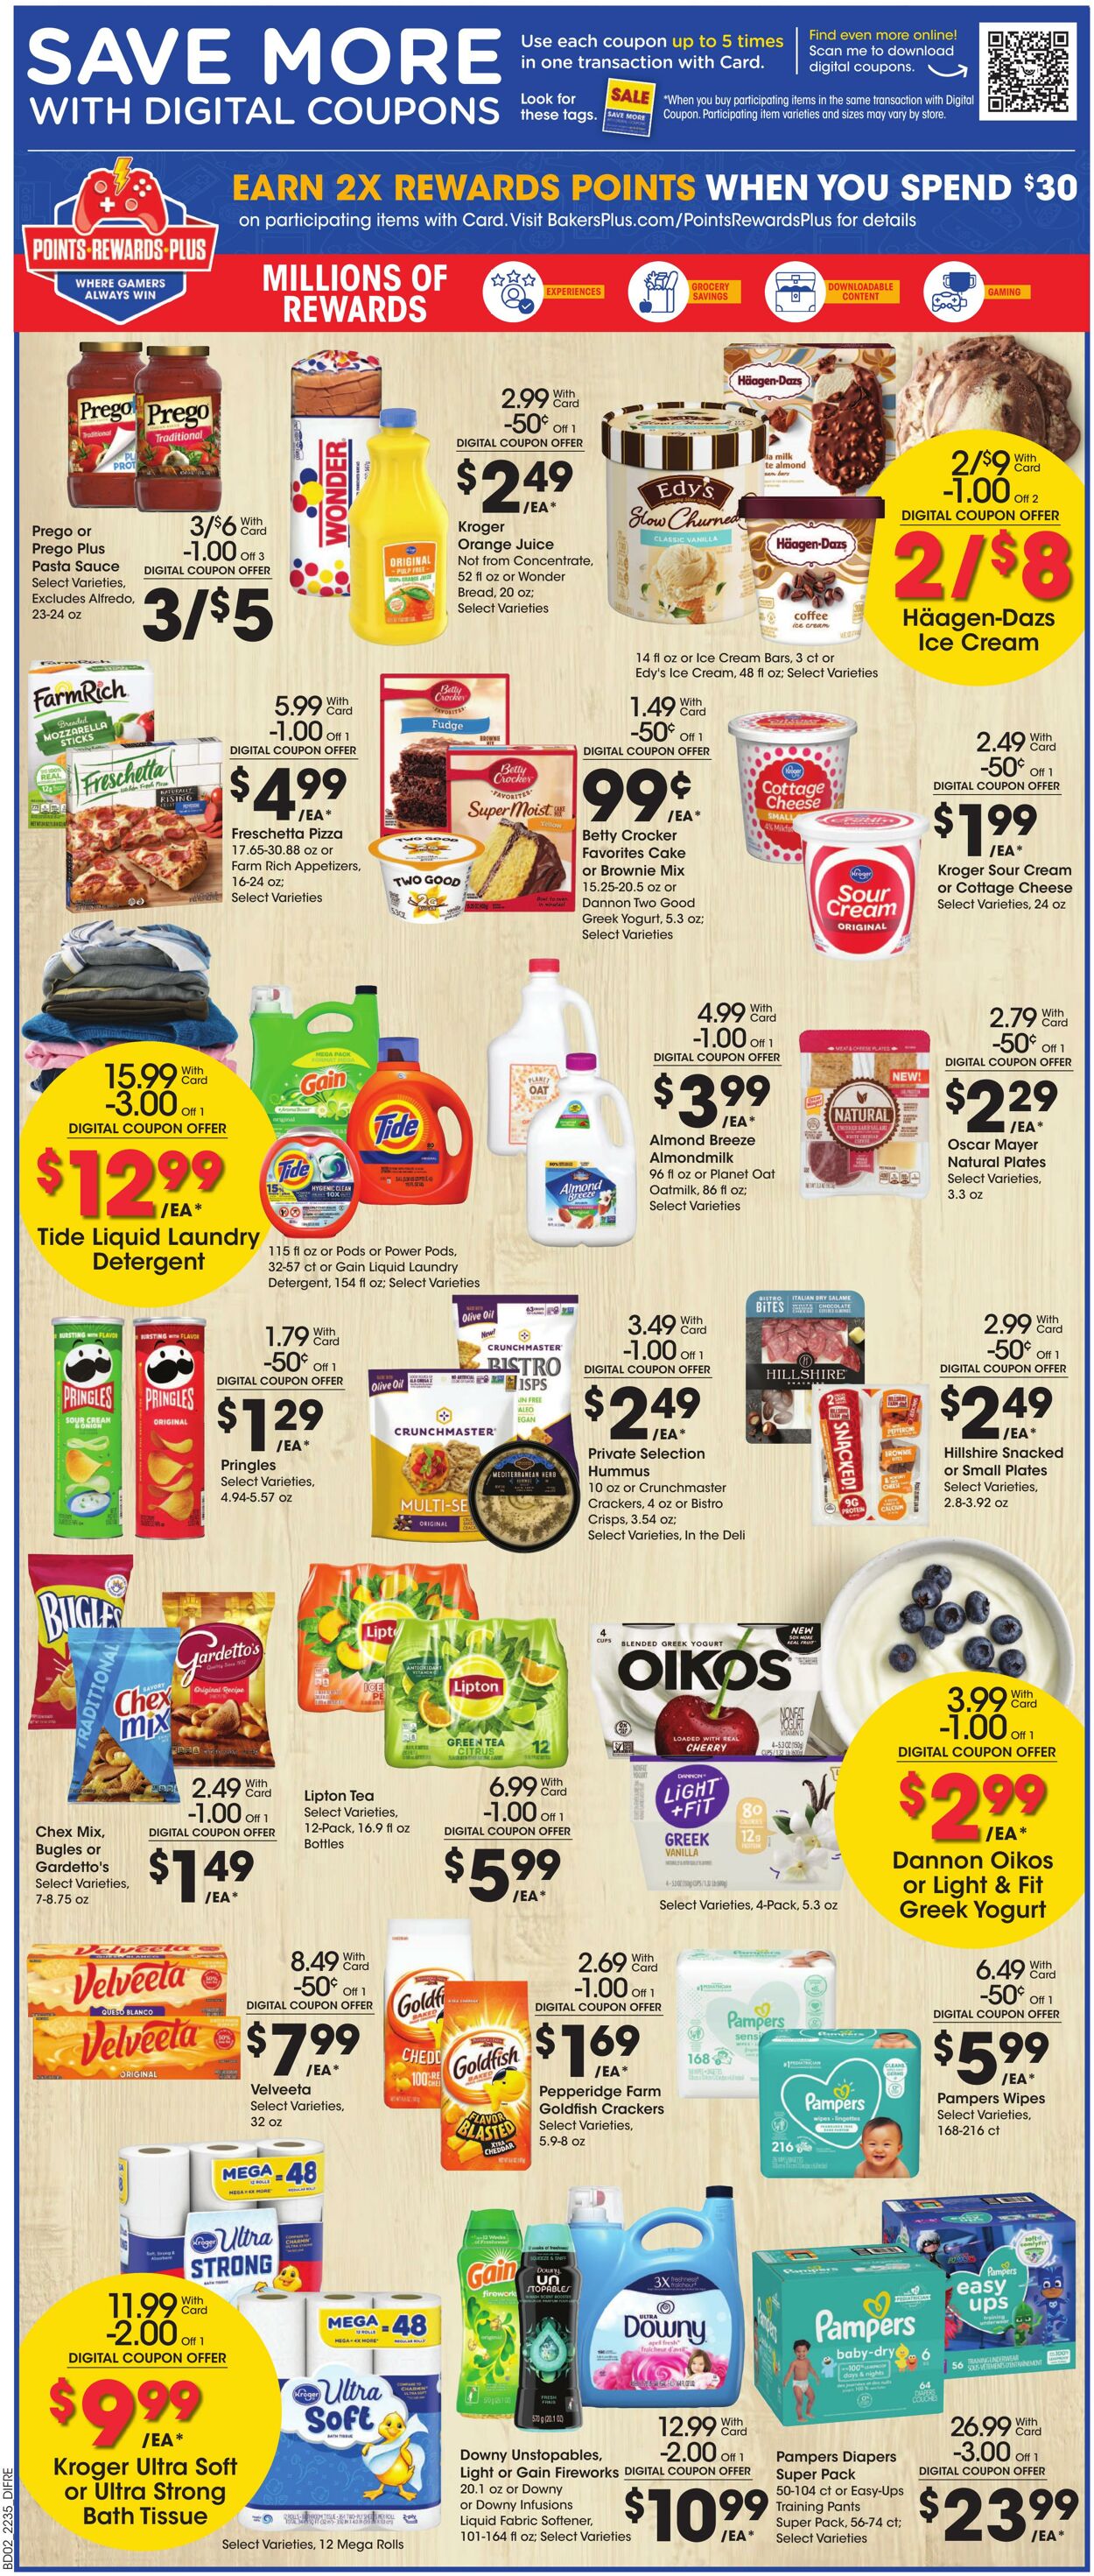 Weekly ad Baker's 09/28/2022 - 10/04/2022